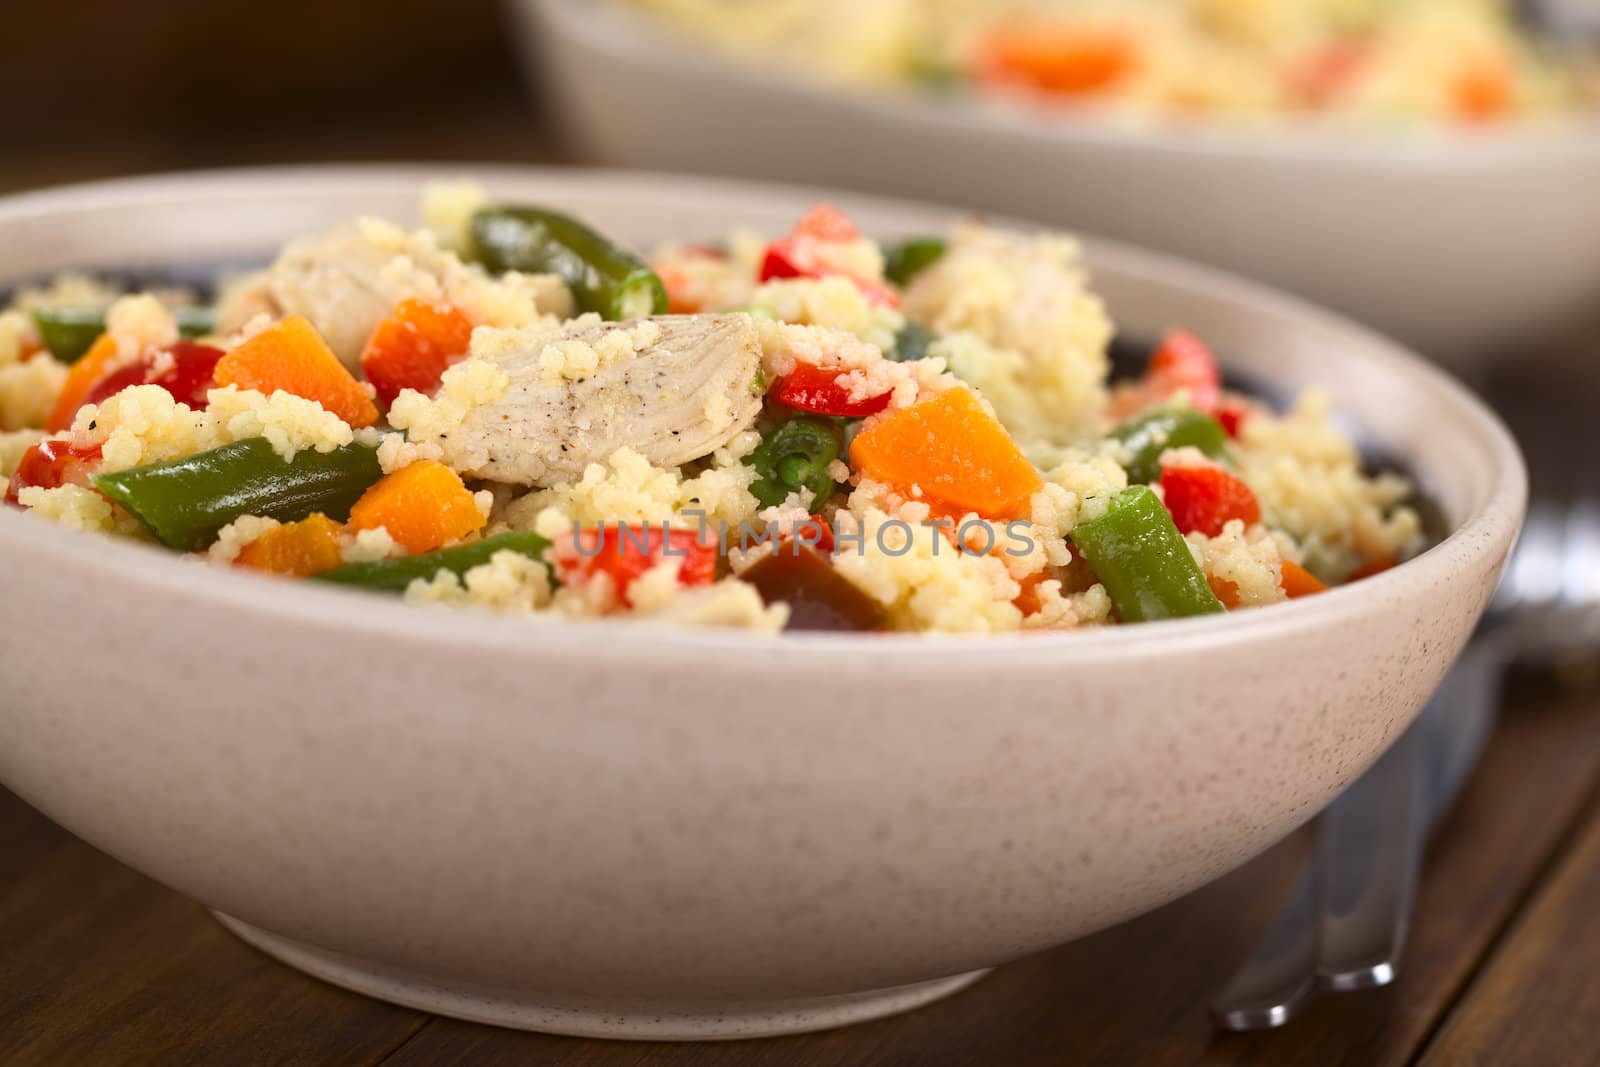 Two bowls of couscous dish with chicken, green bean, carrot and red bell pepper (Selective Focus, Focus on the chicken meat in the middle of the dish) 